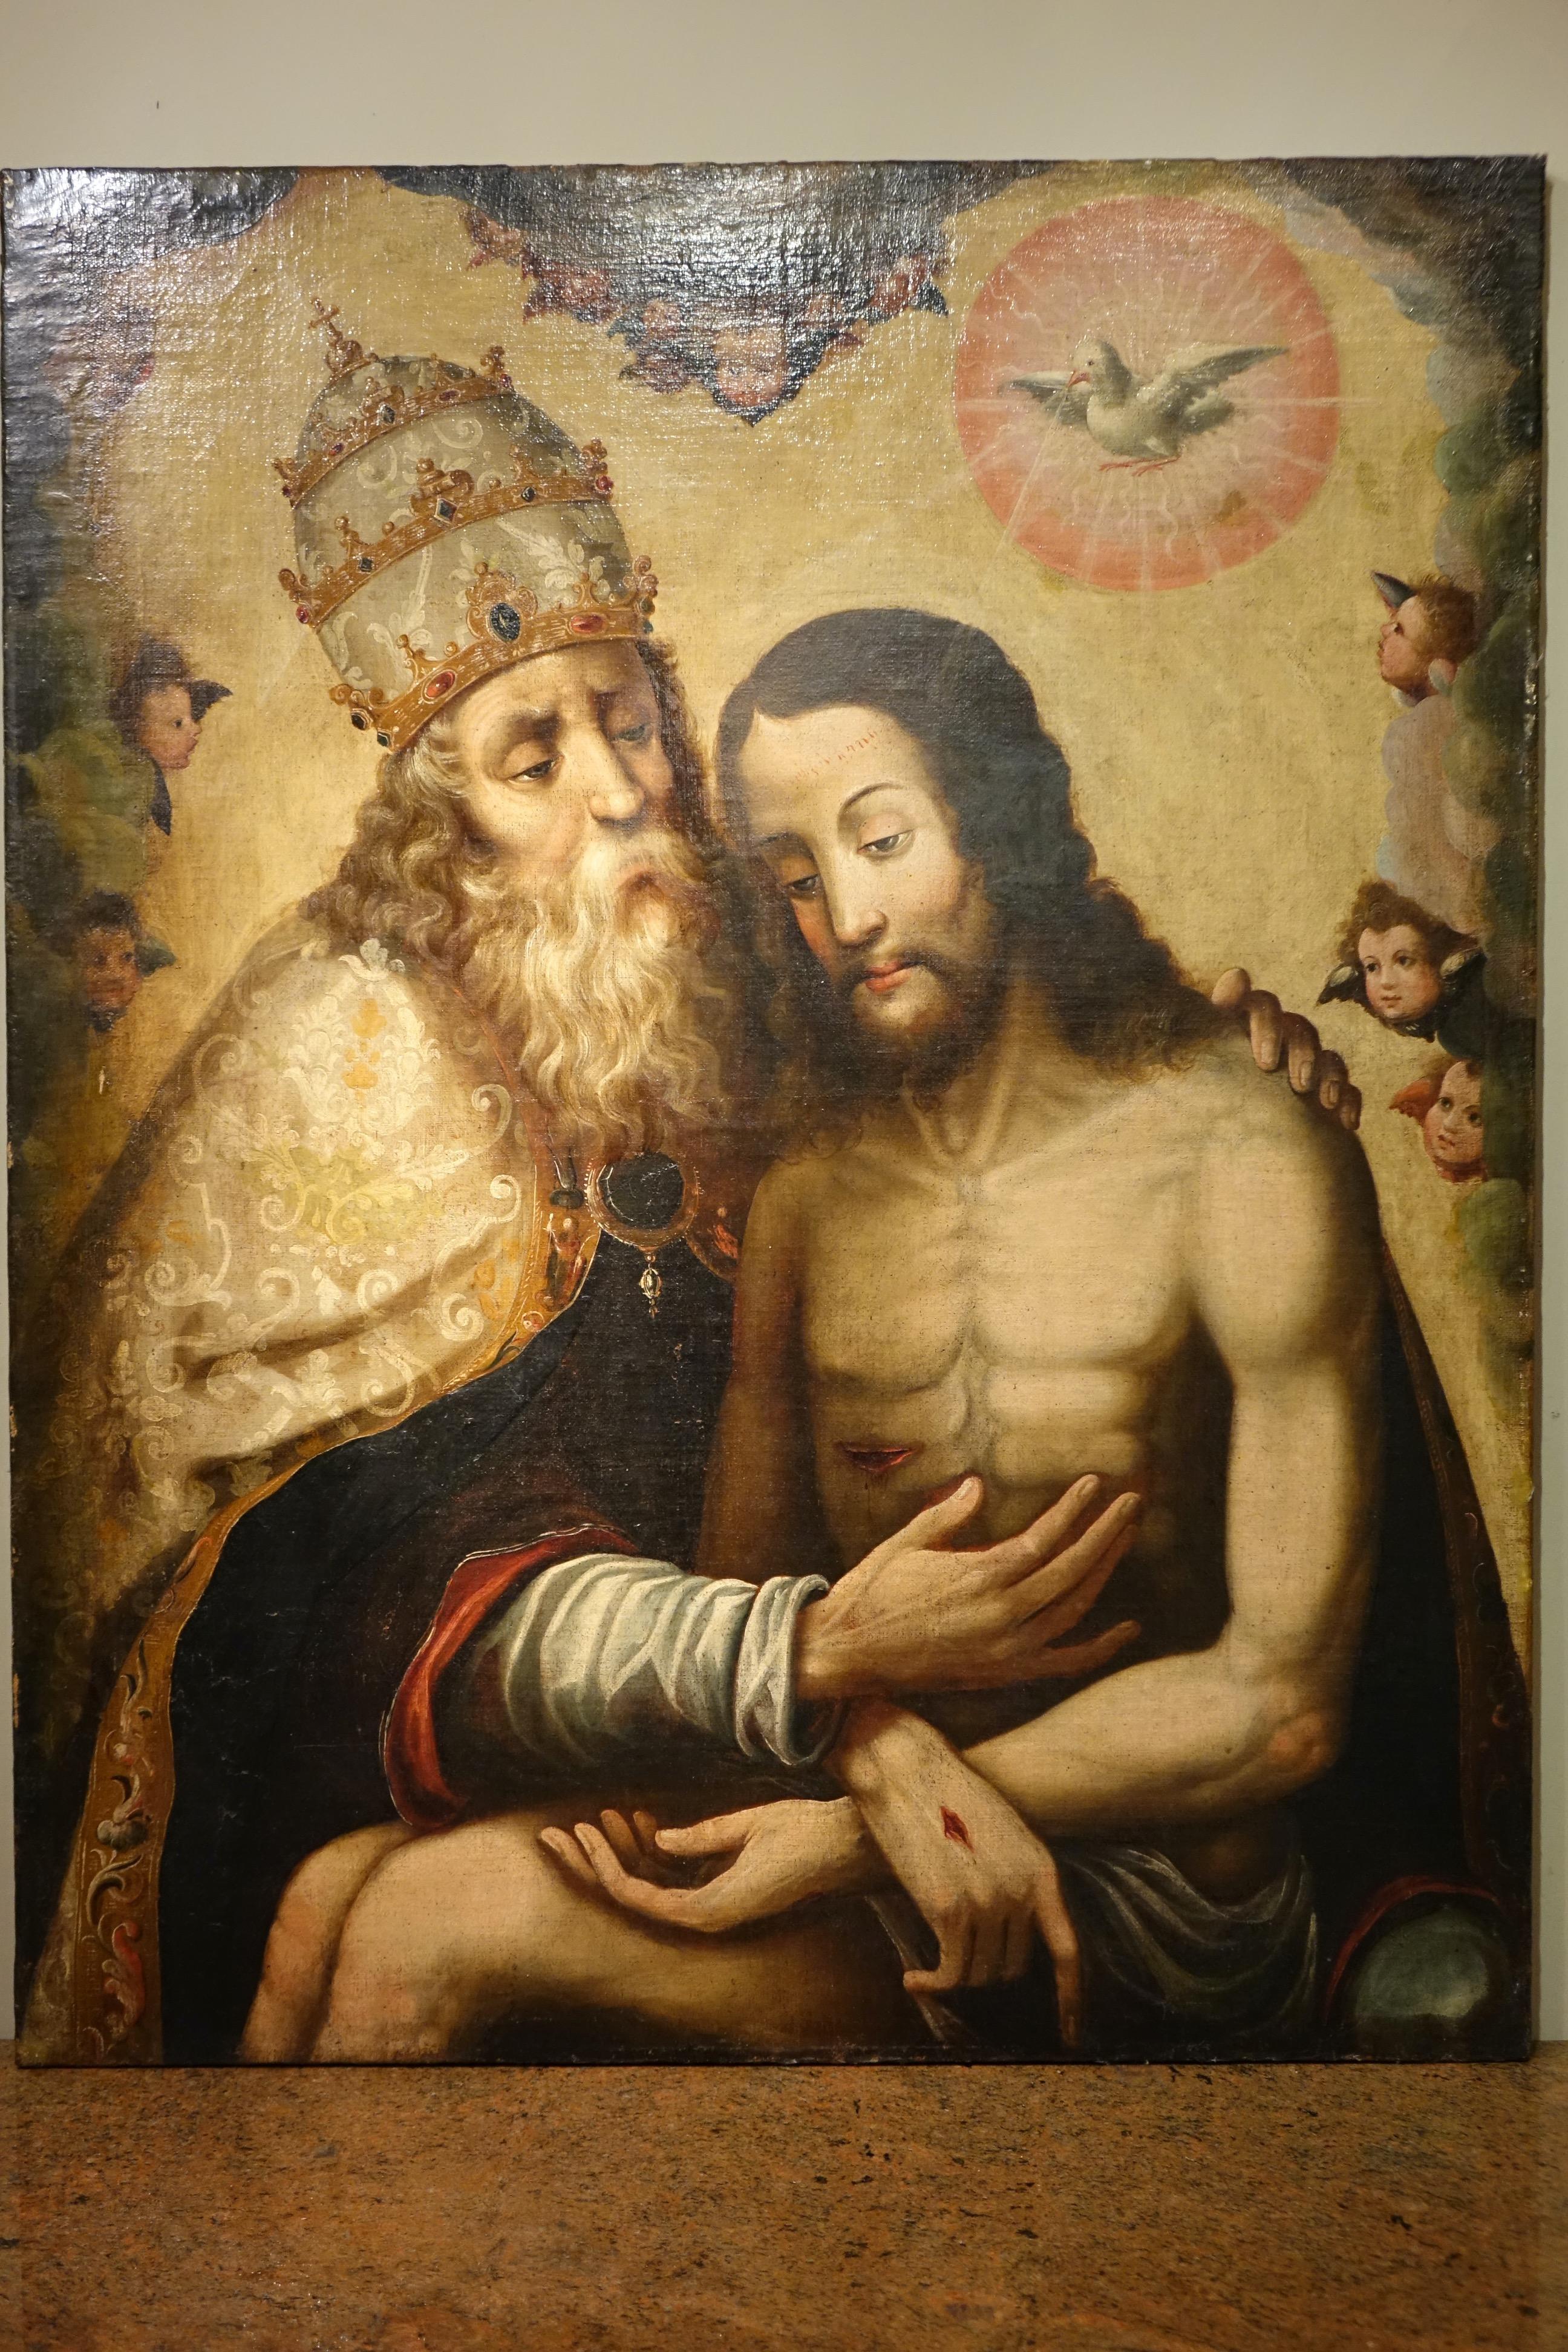 Large oil on canvas representing the Holy Trinity.
It is painted here as a Throne of Grace, vertically, with Jesus dead on the Cross, or supported by God the Father, with the Holy Spirit between or above them (the dove).
Spain, 17th c.
Re- lined,